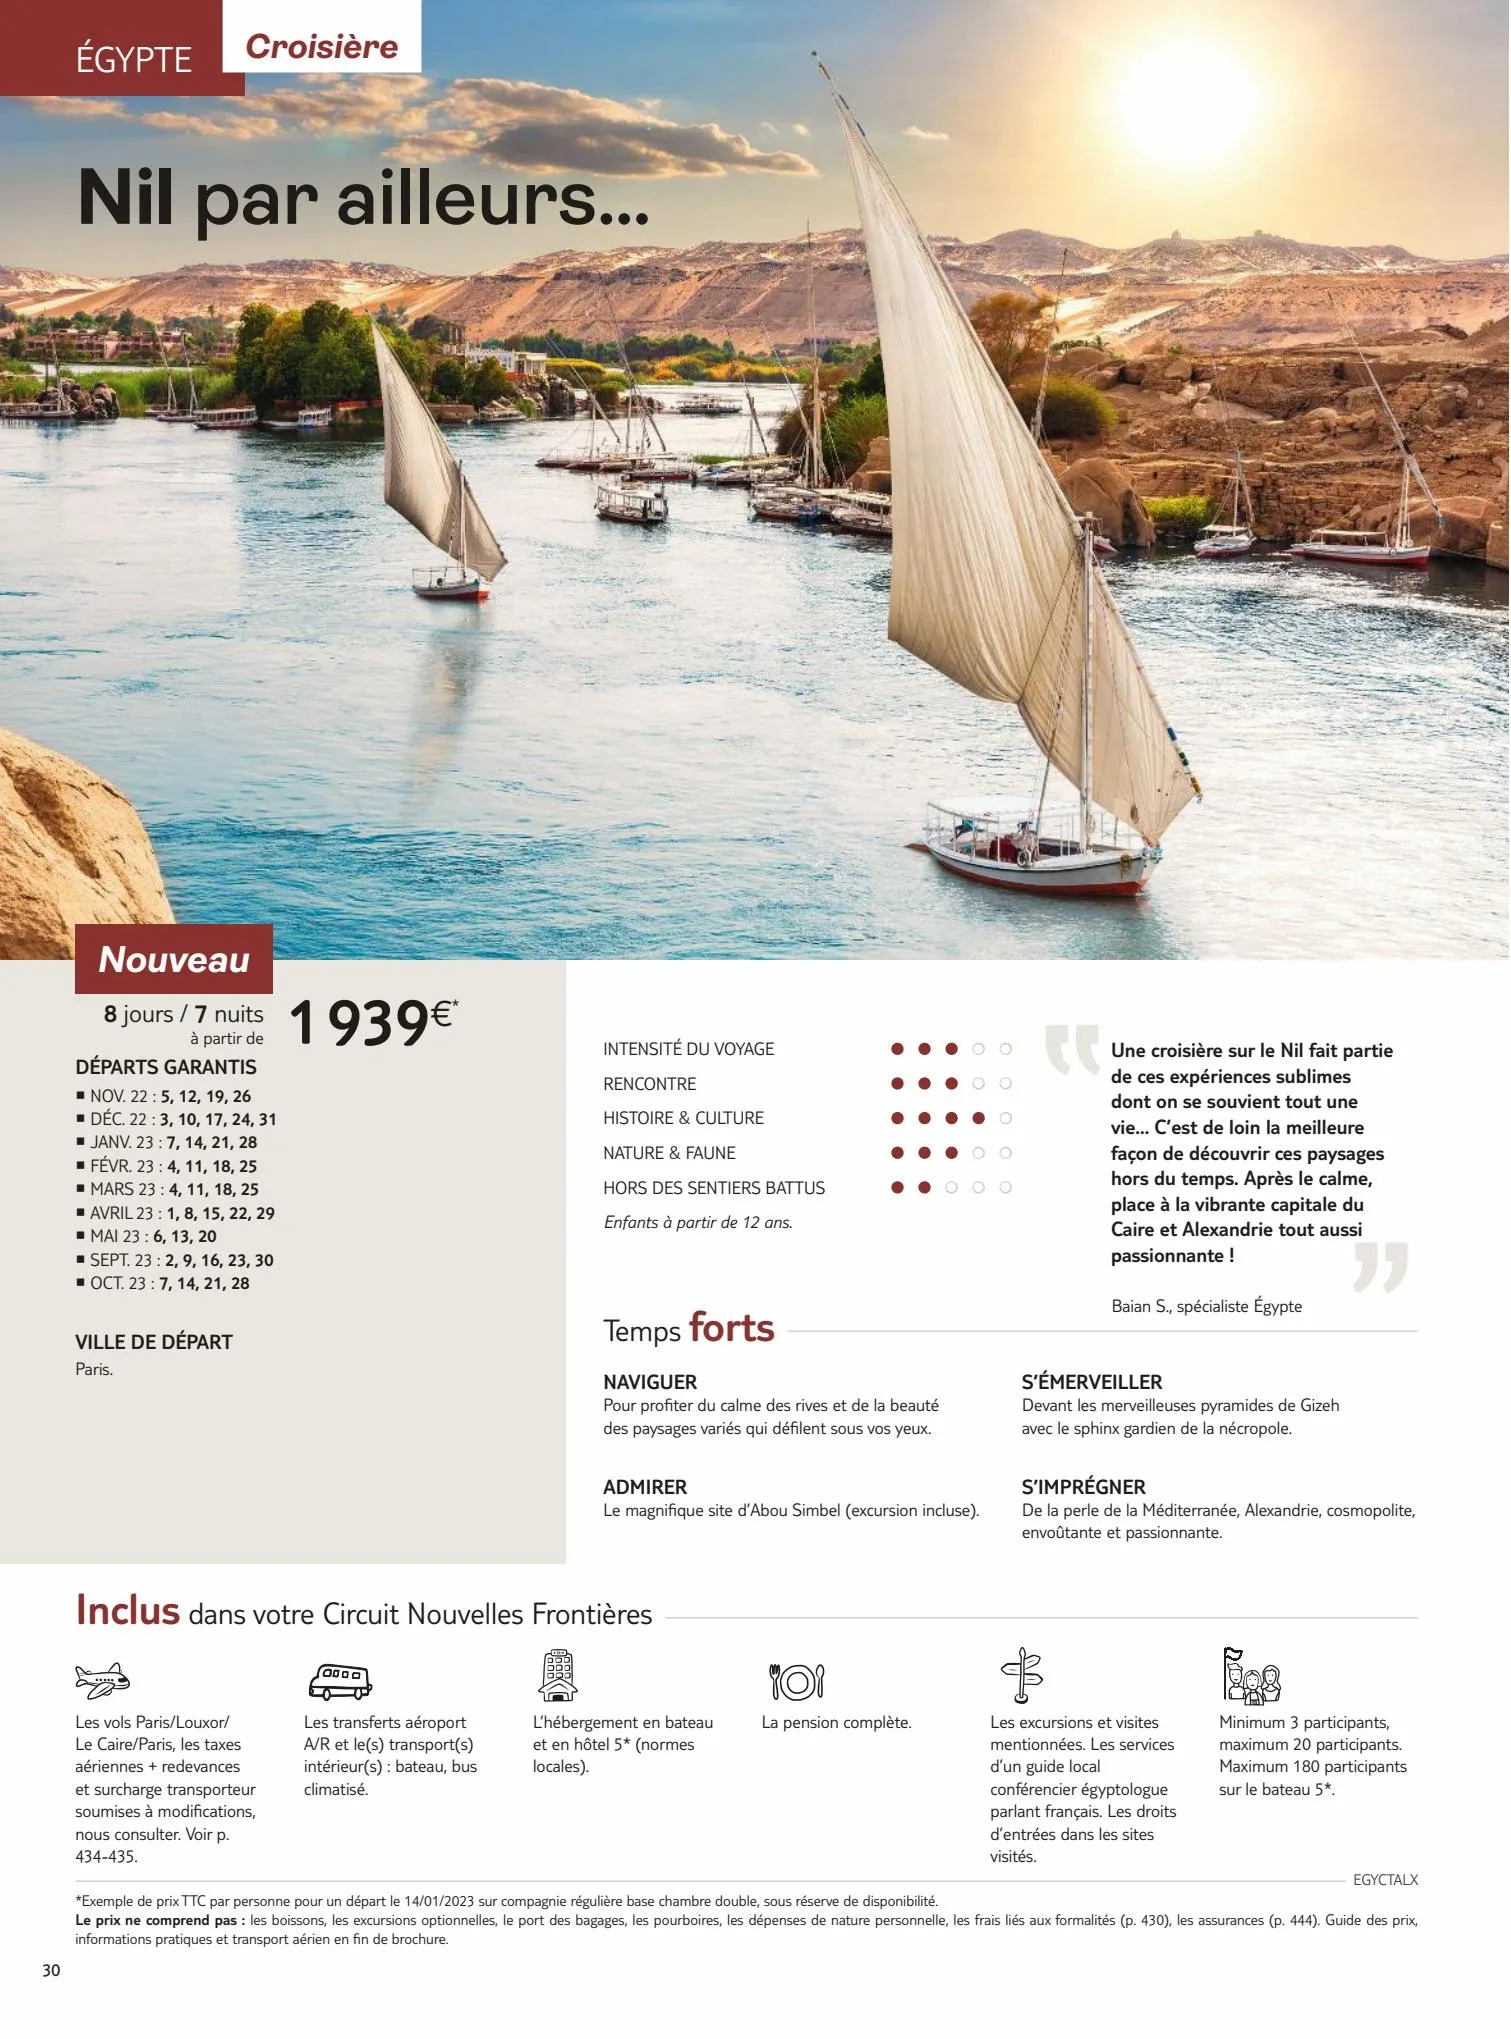 Catalogue TUI circuits nouvelles frontieres 2023, page 00032